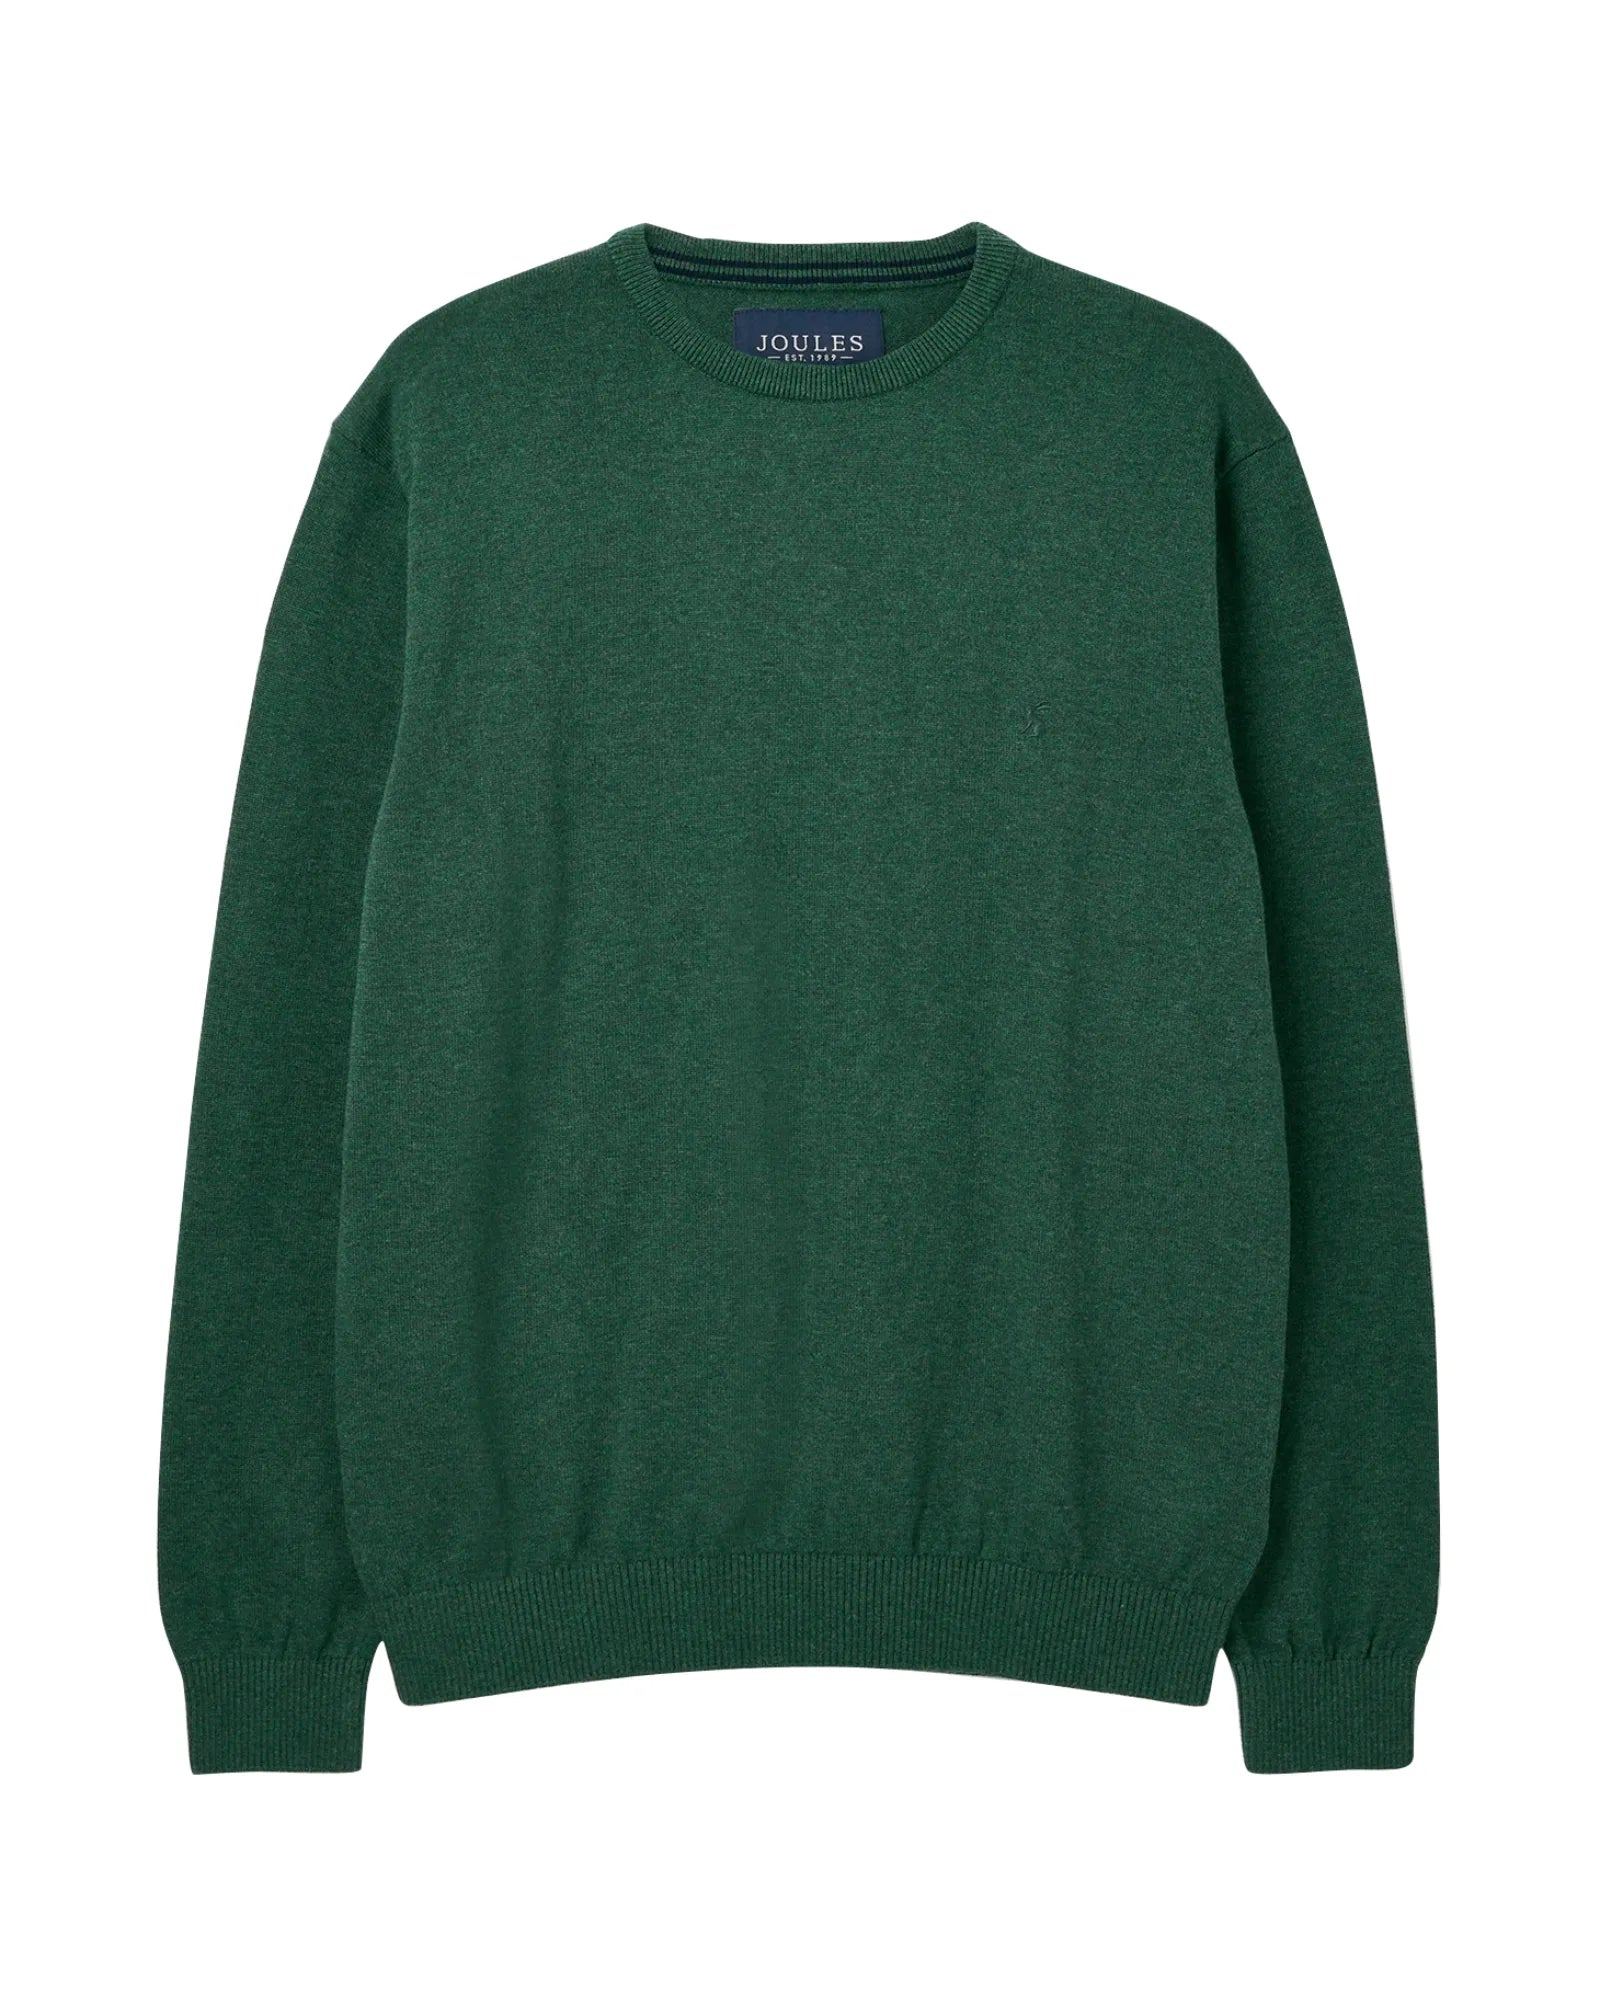 Jarvis Green Crew Neck Knitted Jumper